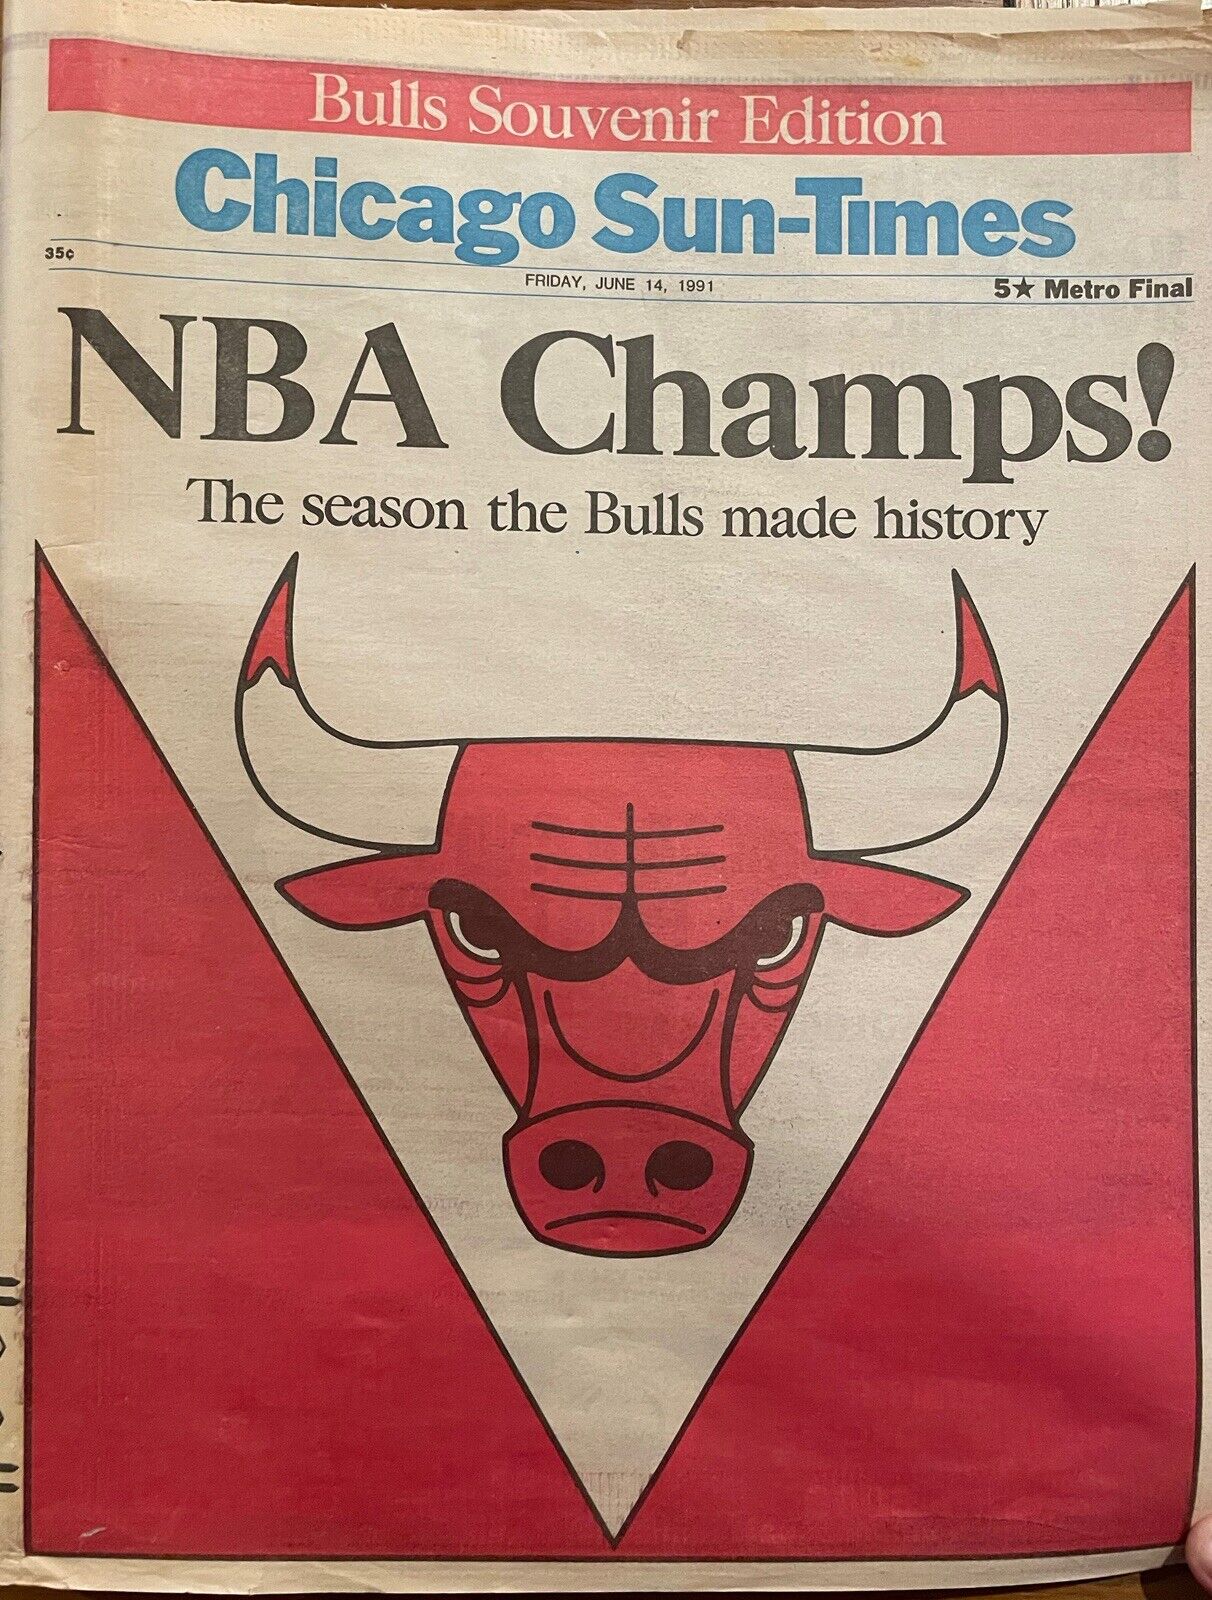 June 14 1991 Chicago Sun-Times Newspaper Chicago Bulls Champs Edition